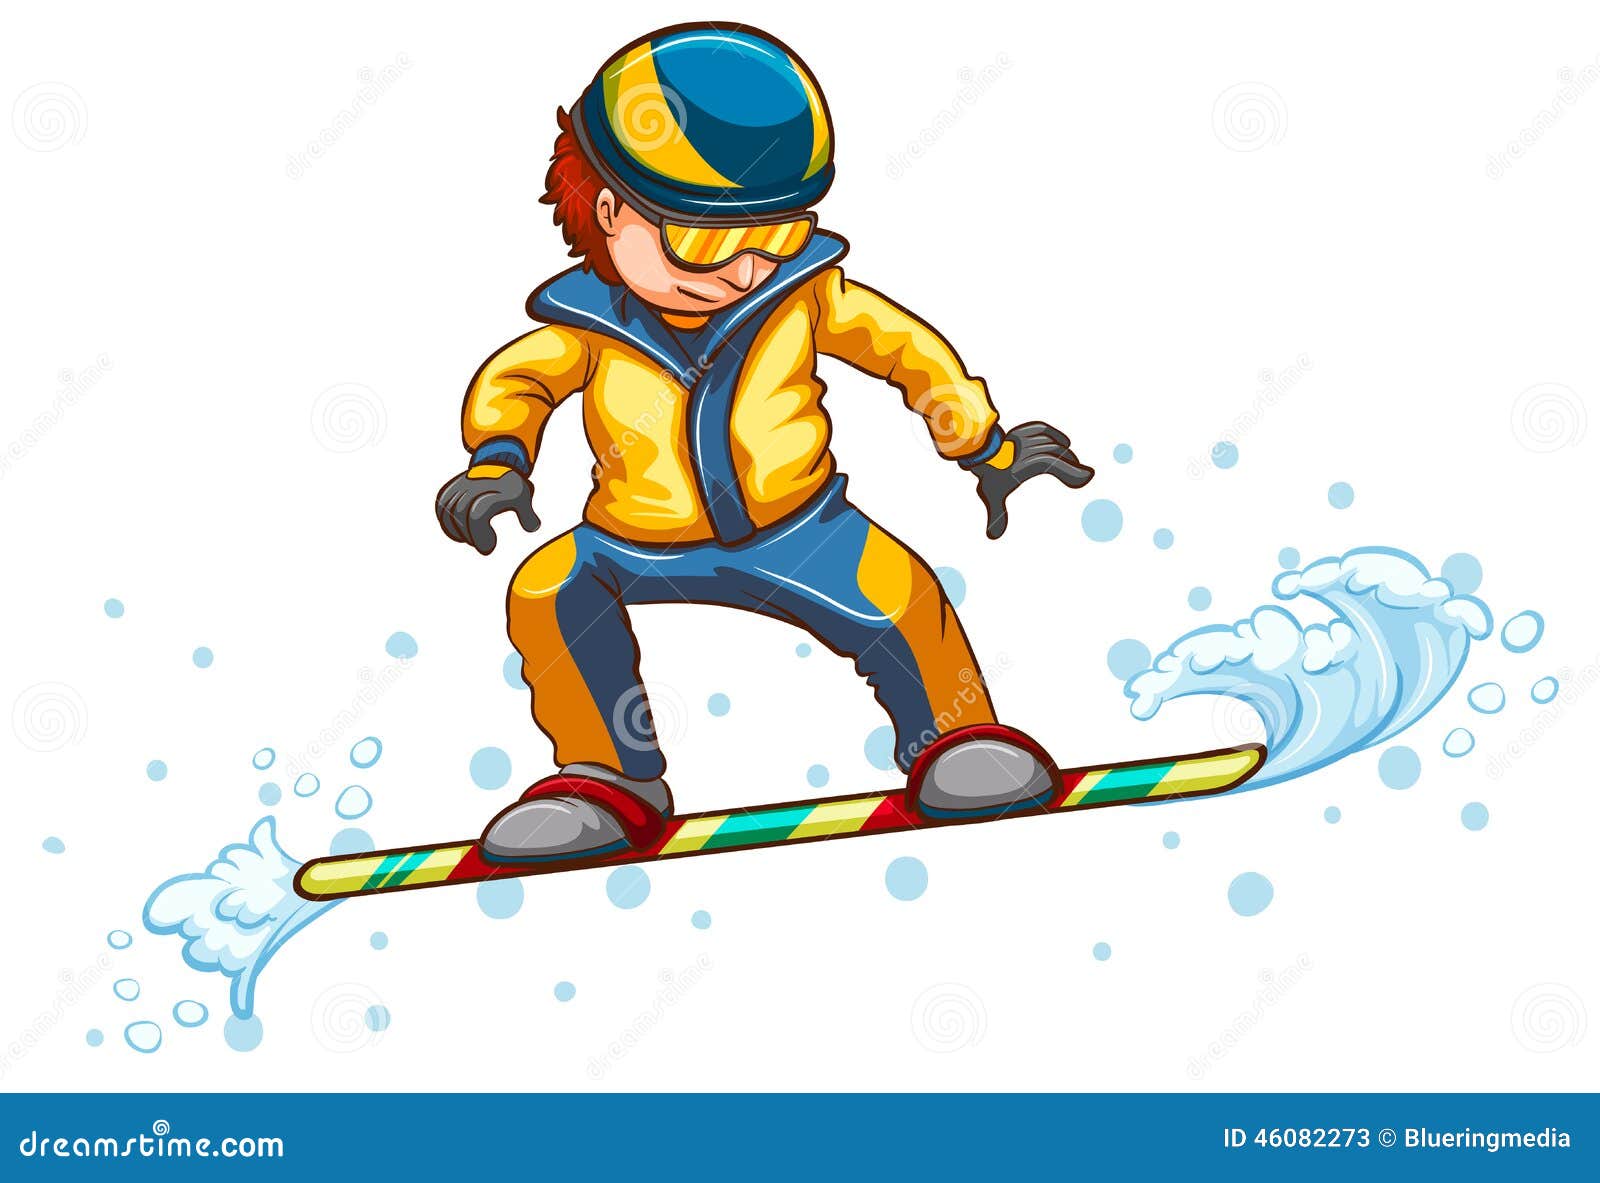 A Drawing of a Boy Engaging in a Wintersport Activity Stock Vector ...